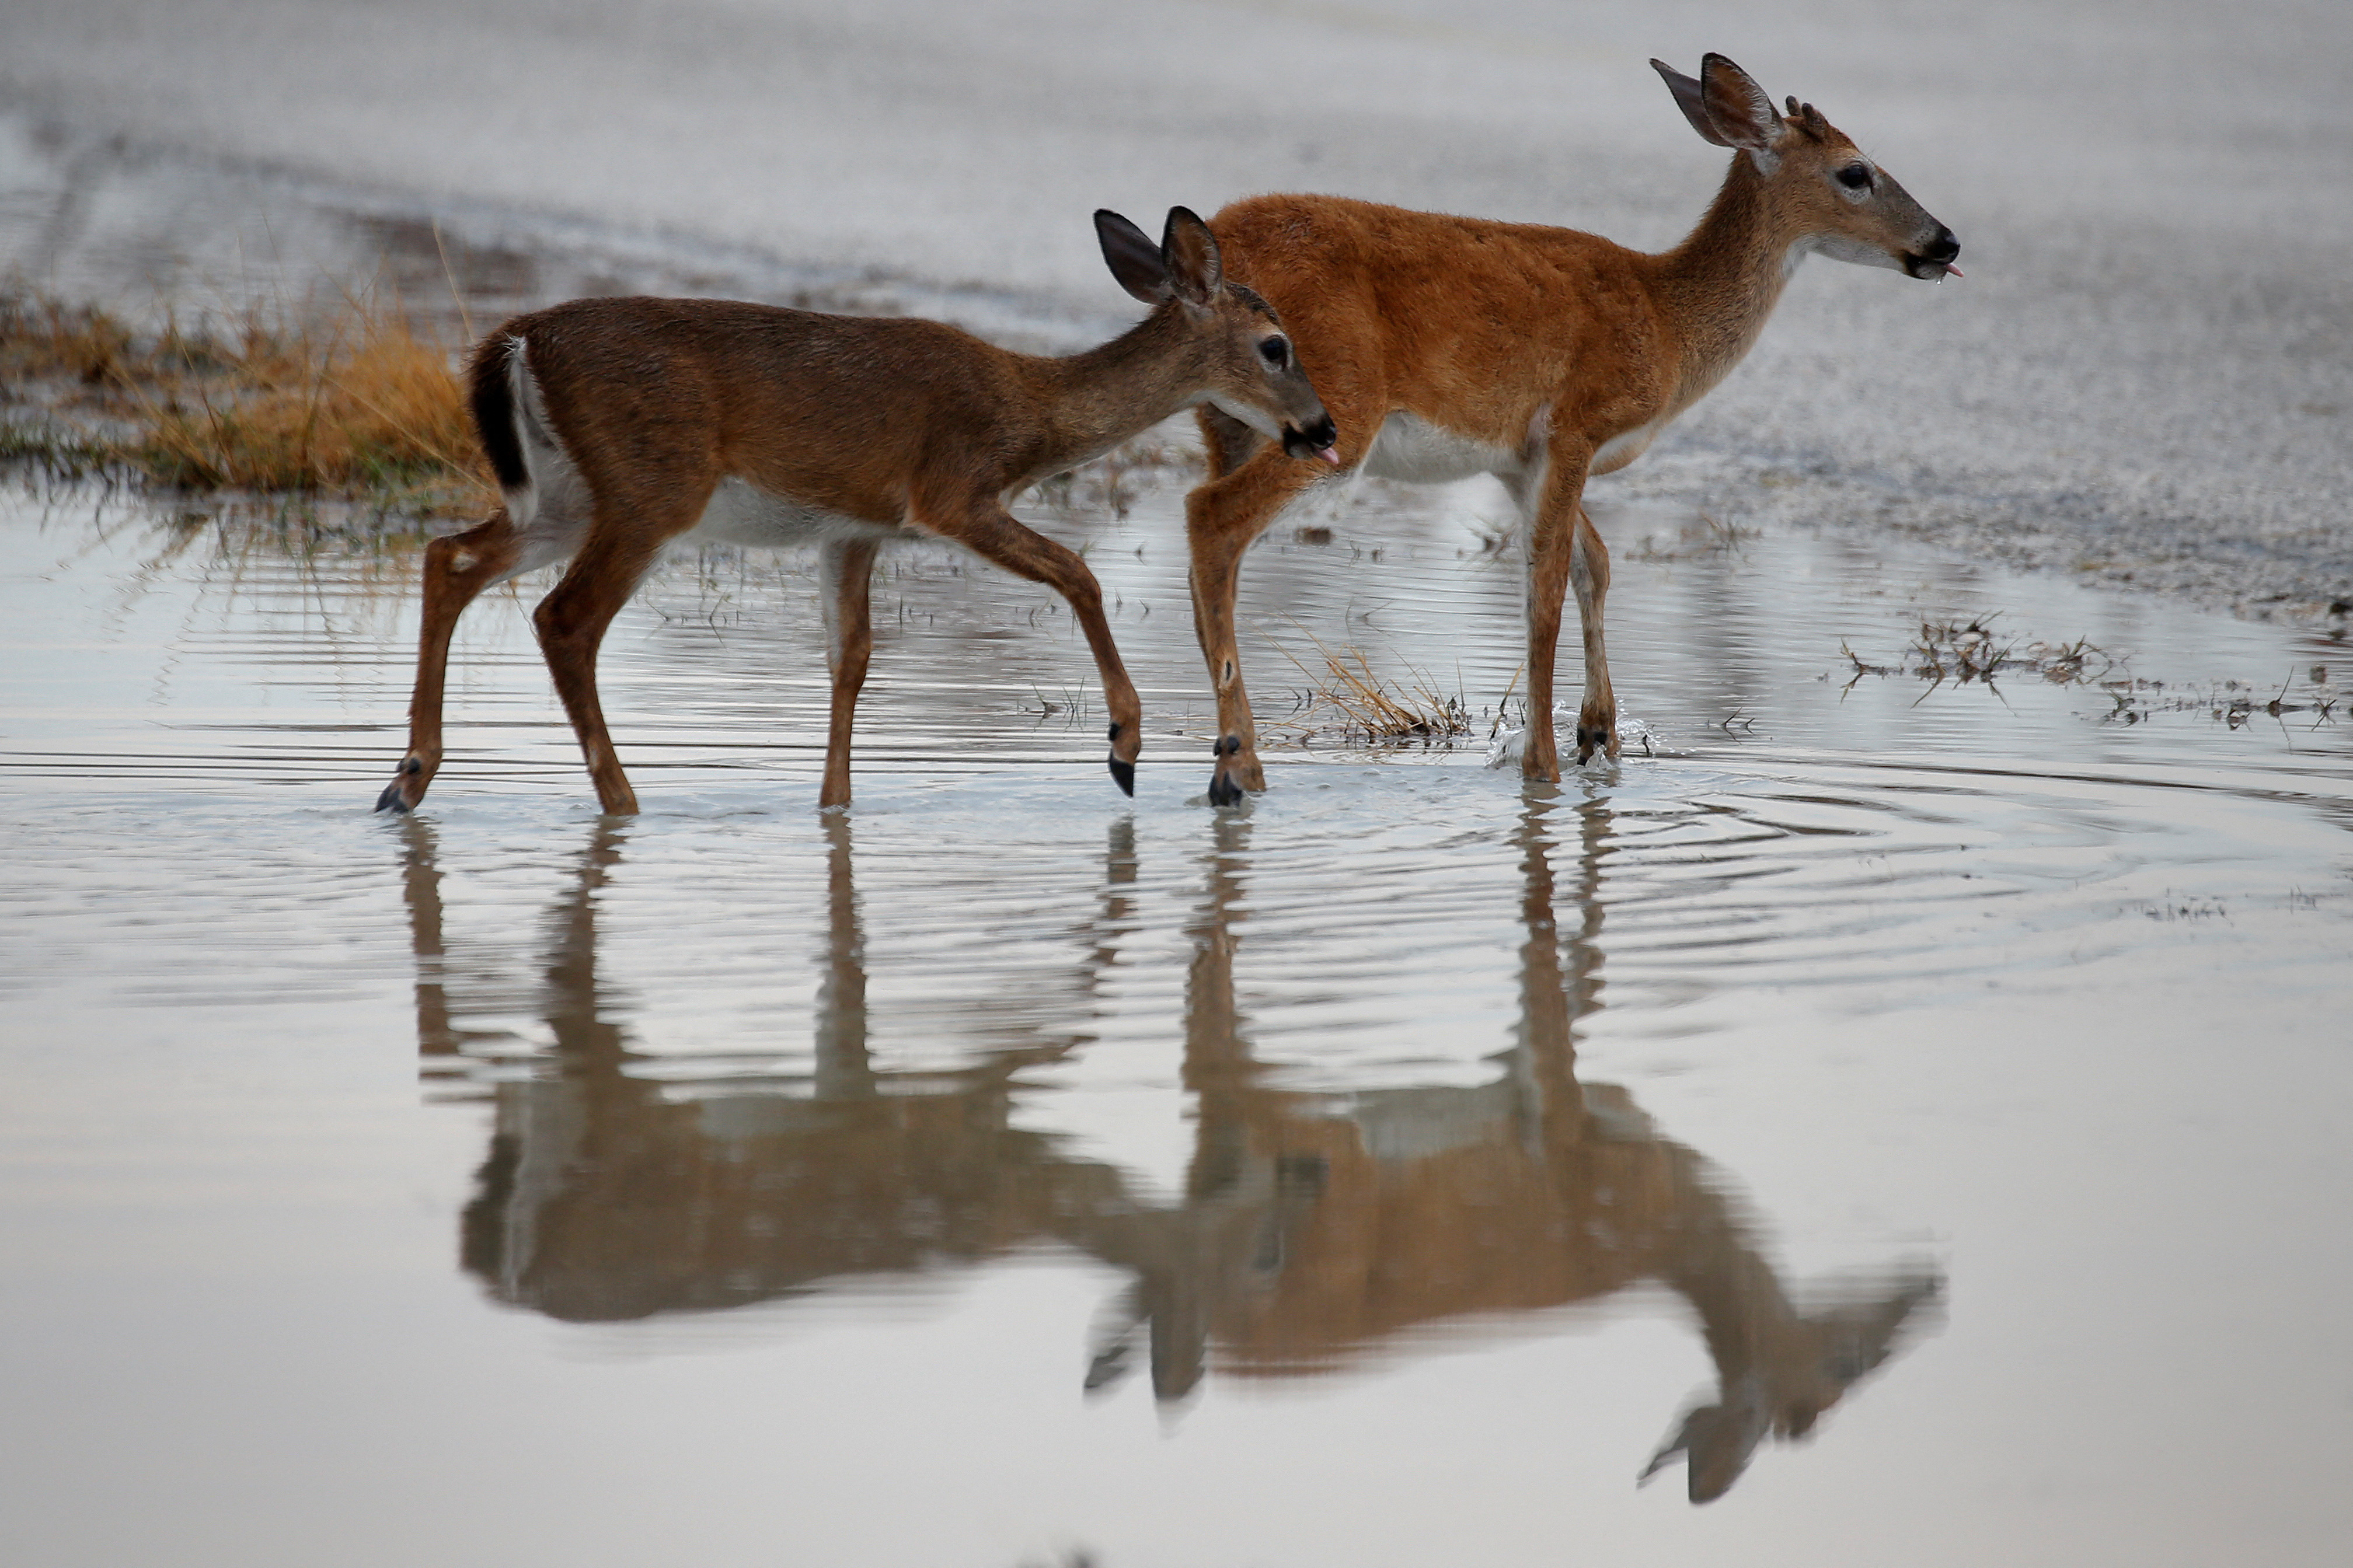 Endangered Key Deer are pictured in a puddle following Hurricane Irma in Big Pine Key, Florida